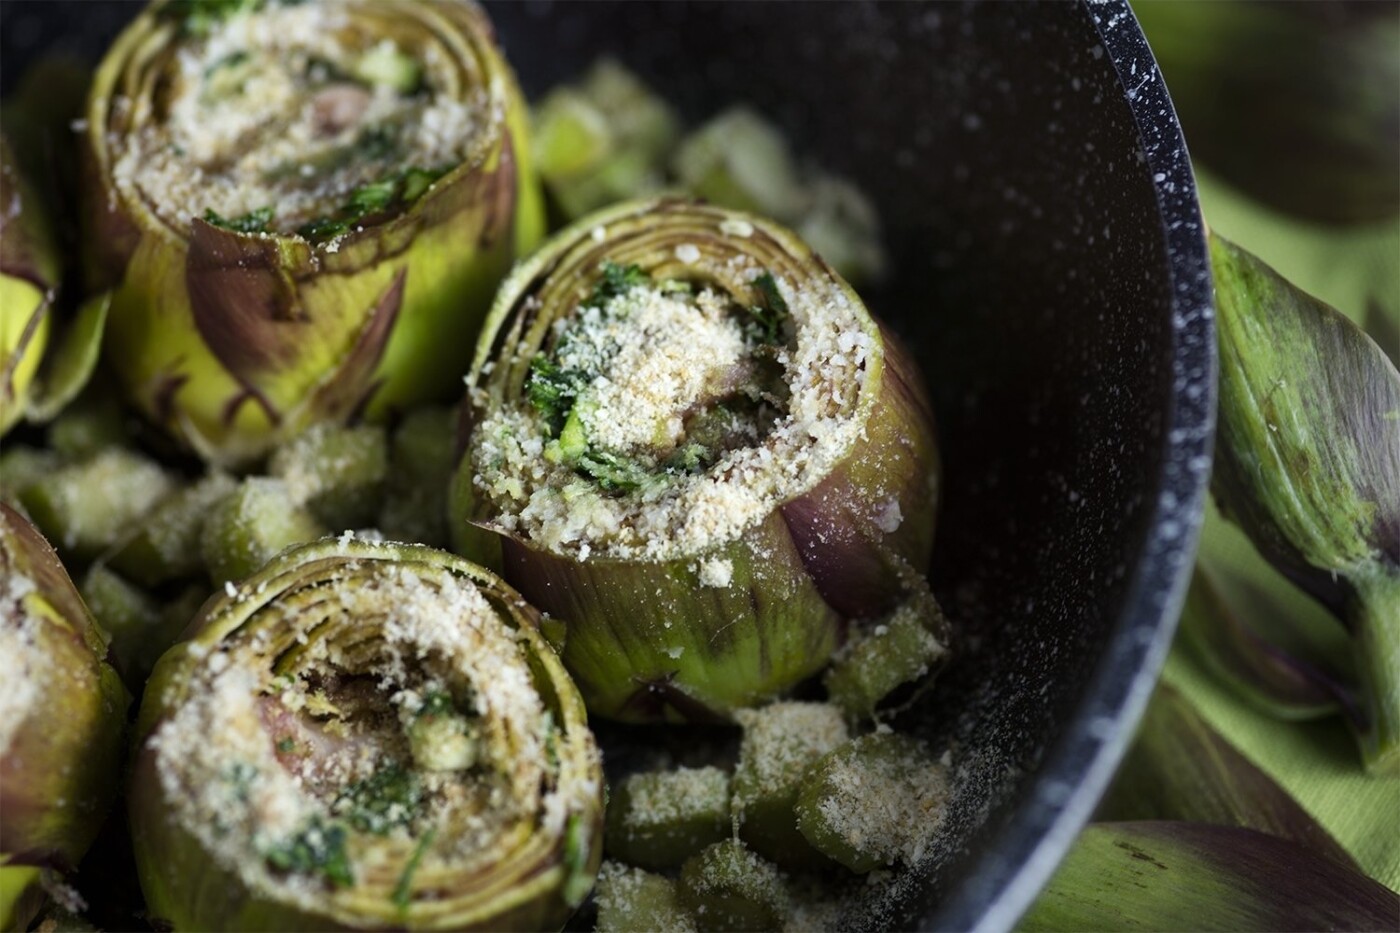 I always find Beauty in Food... I was working on a shooting for the local market producers and I chose those stunning artichokes, arranging them in a very simple recipe with a parsley-garlic and bacon filling and a generous handful of parmesan cheese. I was really struck by the wide range of green hues and by the burgundy shades which I wanted to enhance. PS They were delicious as well!